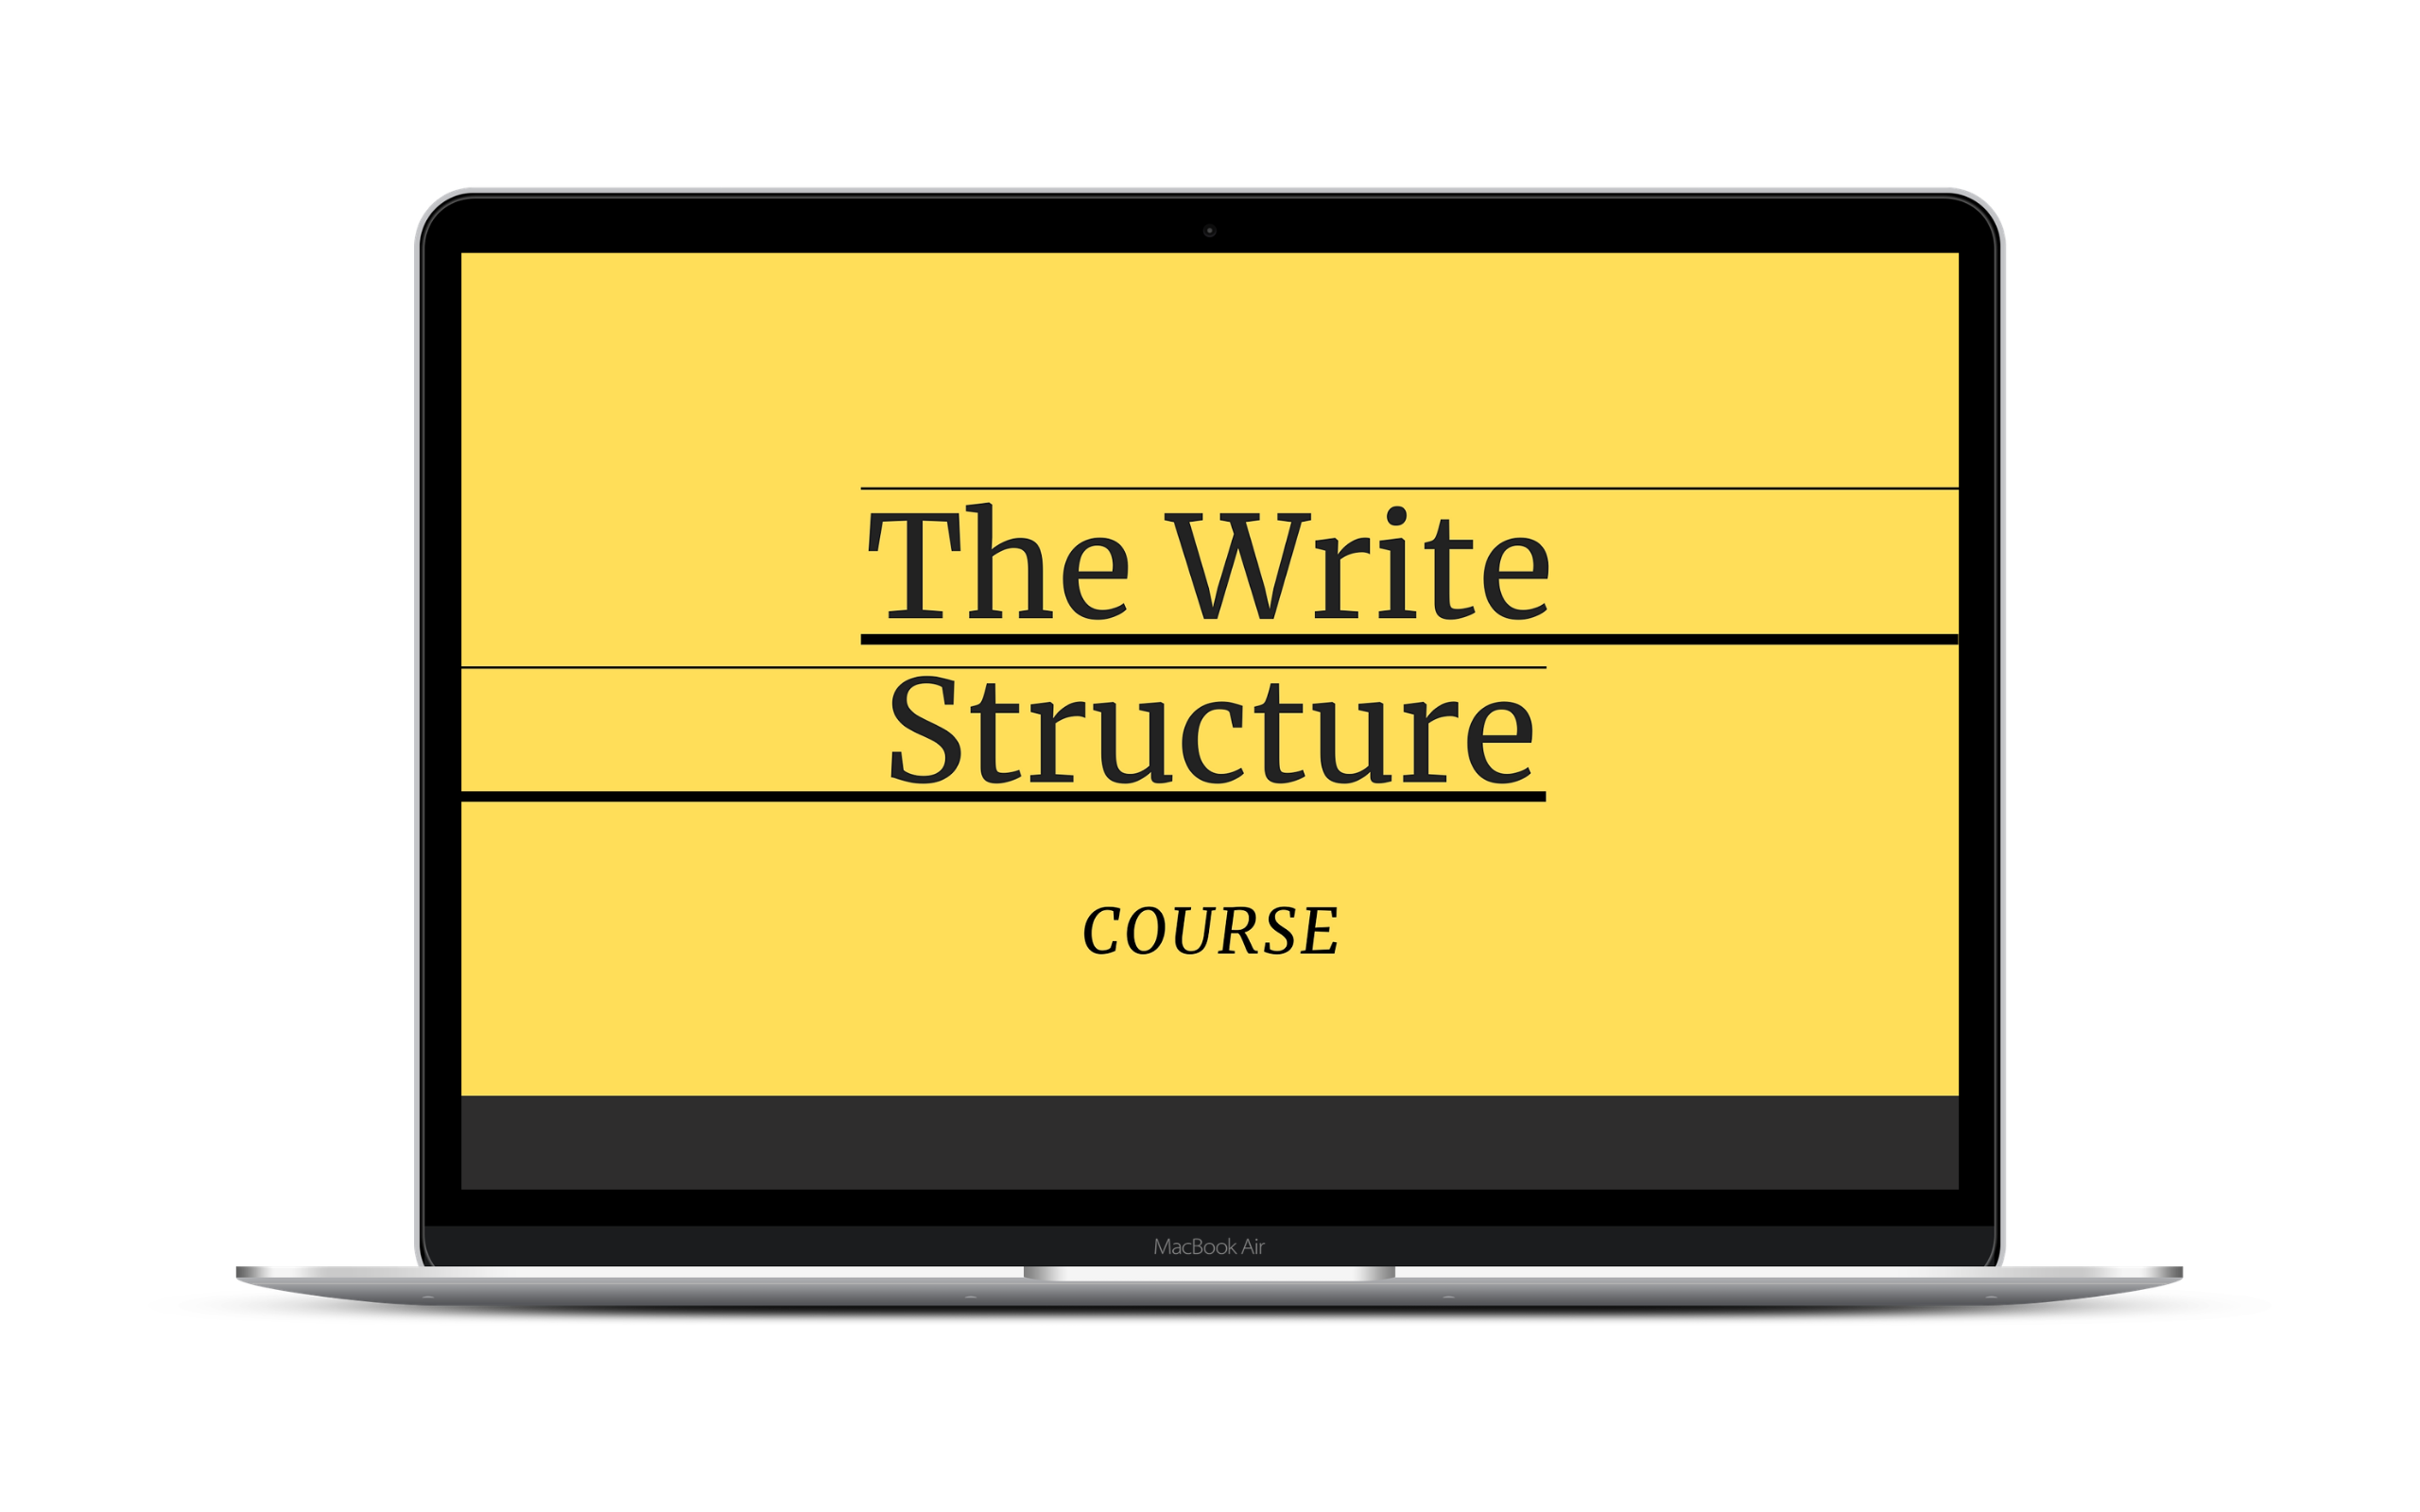 The Write Structure Course Mockup